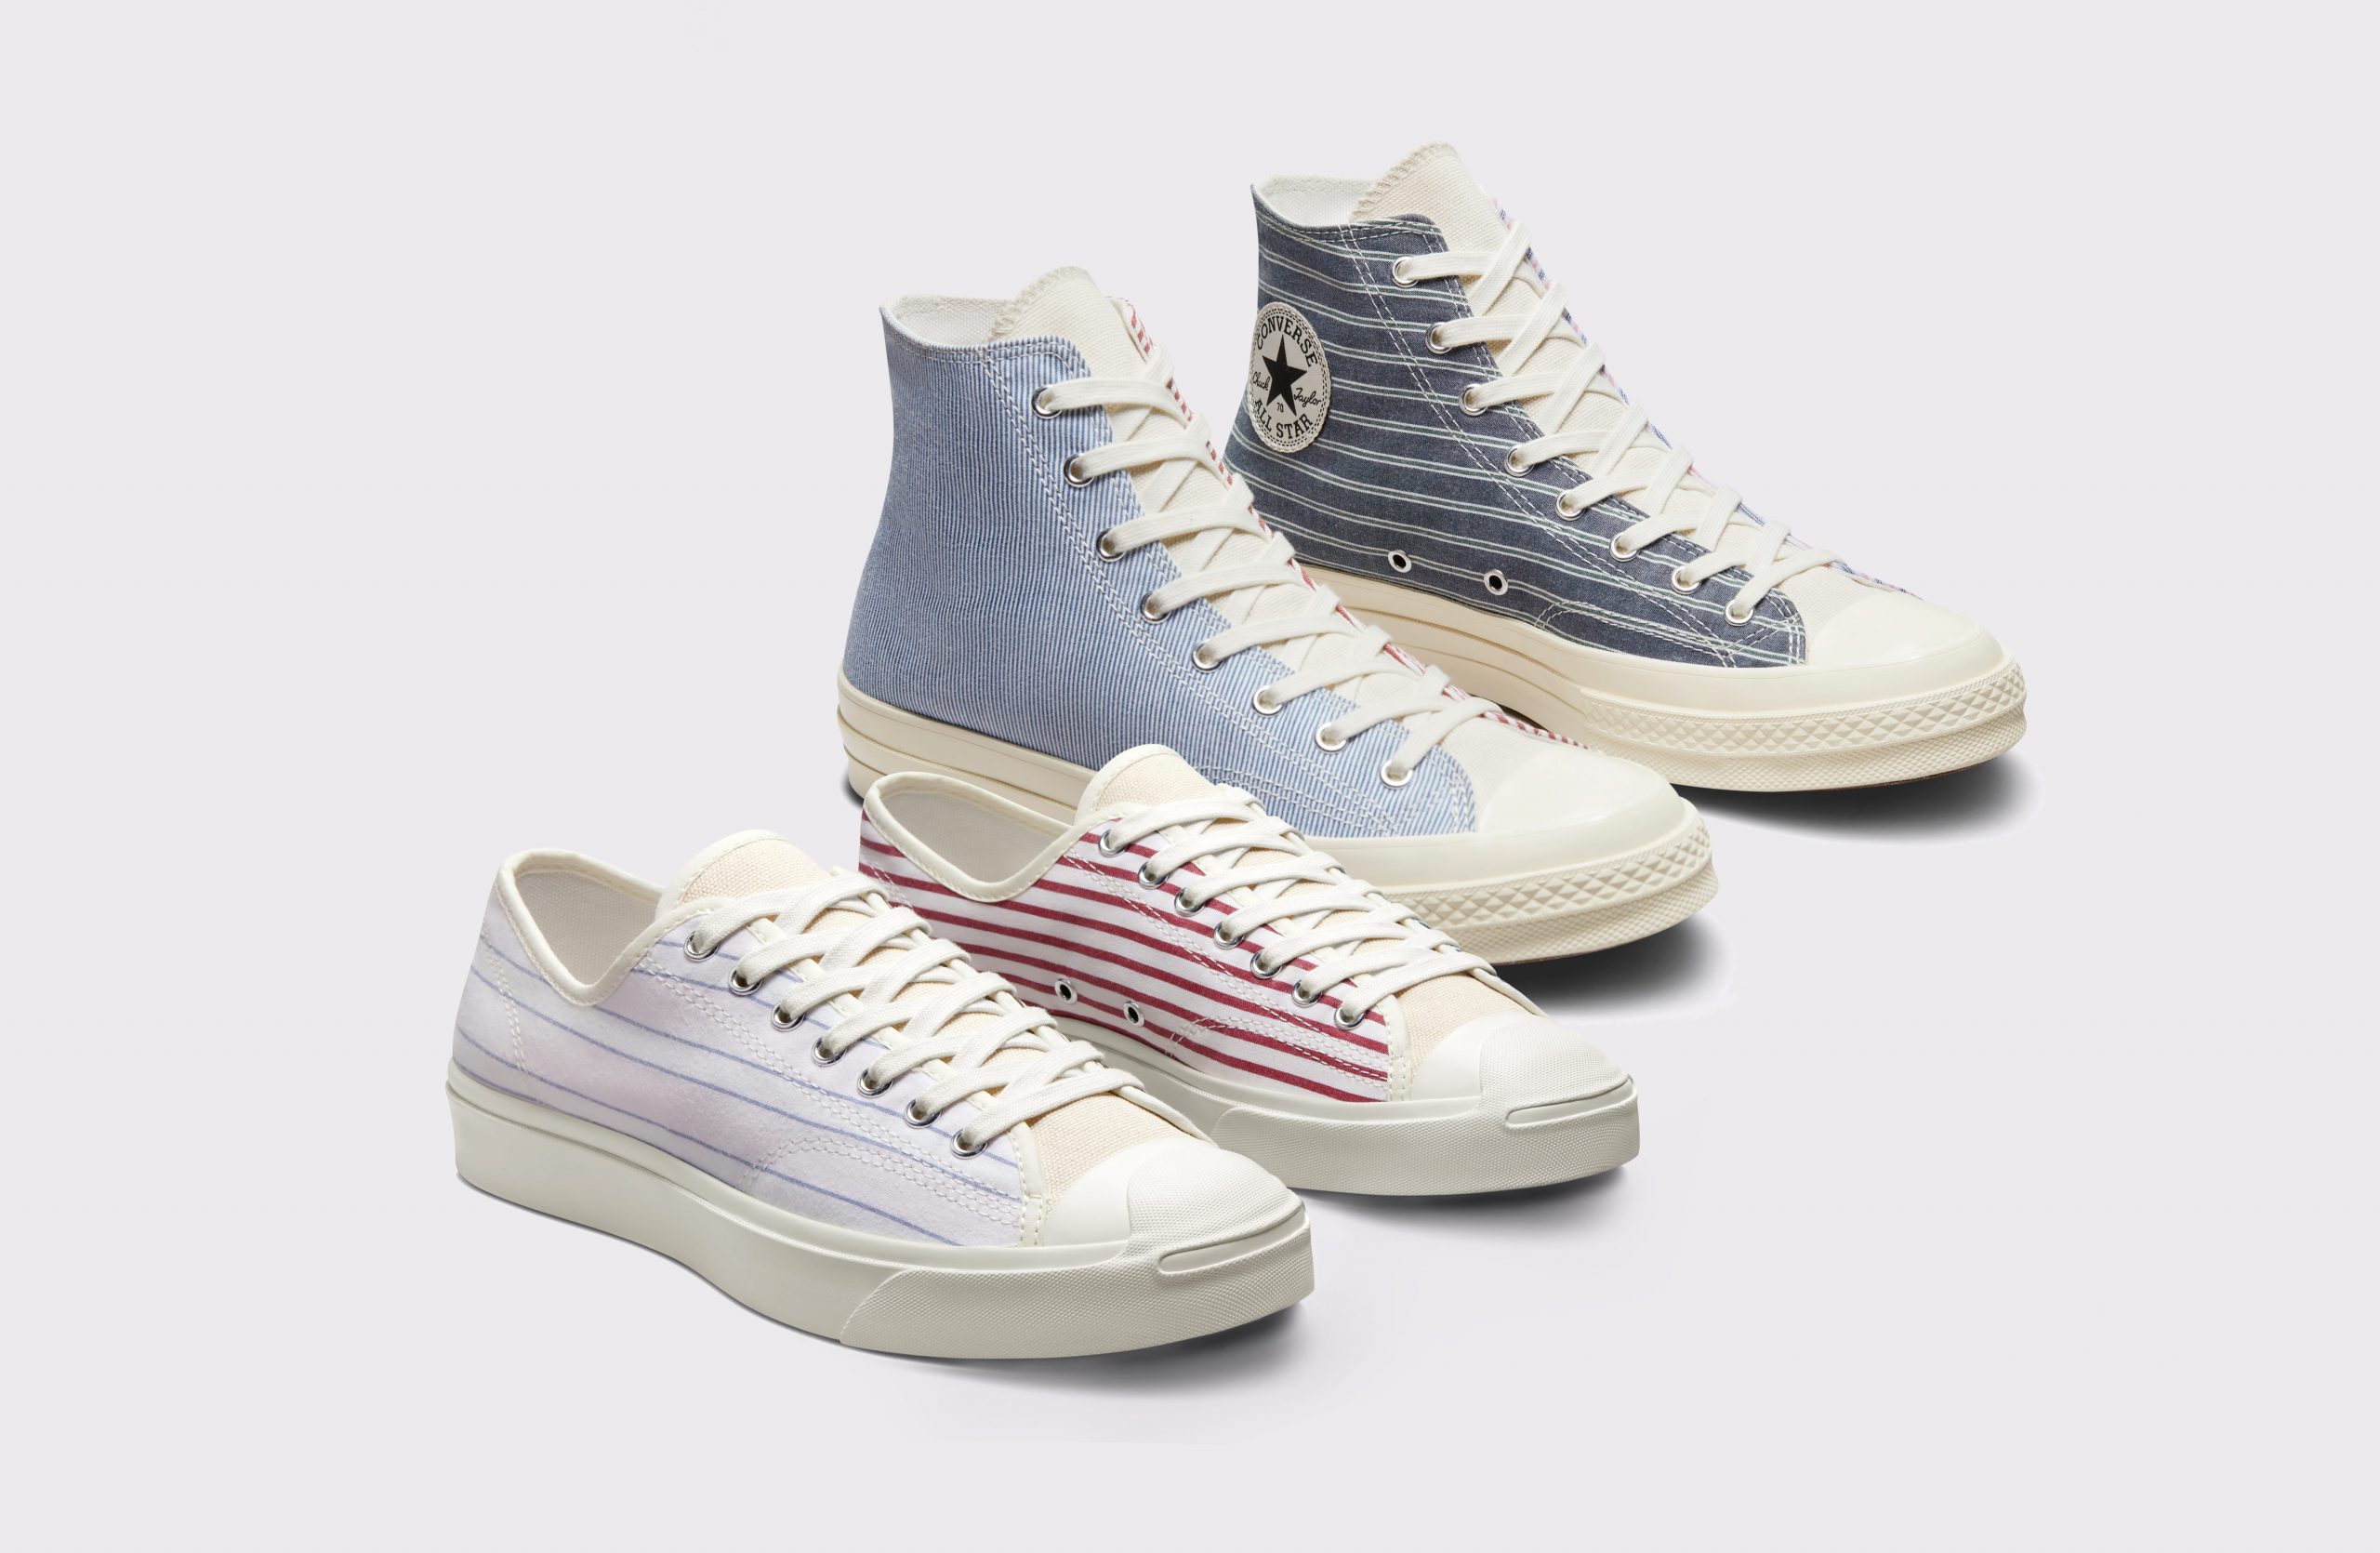 A series of converse low top and high top shoes